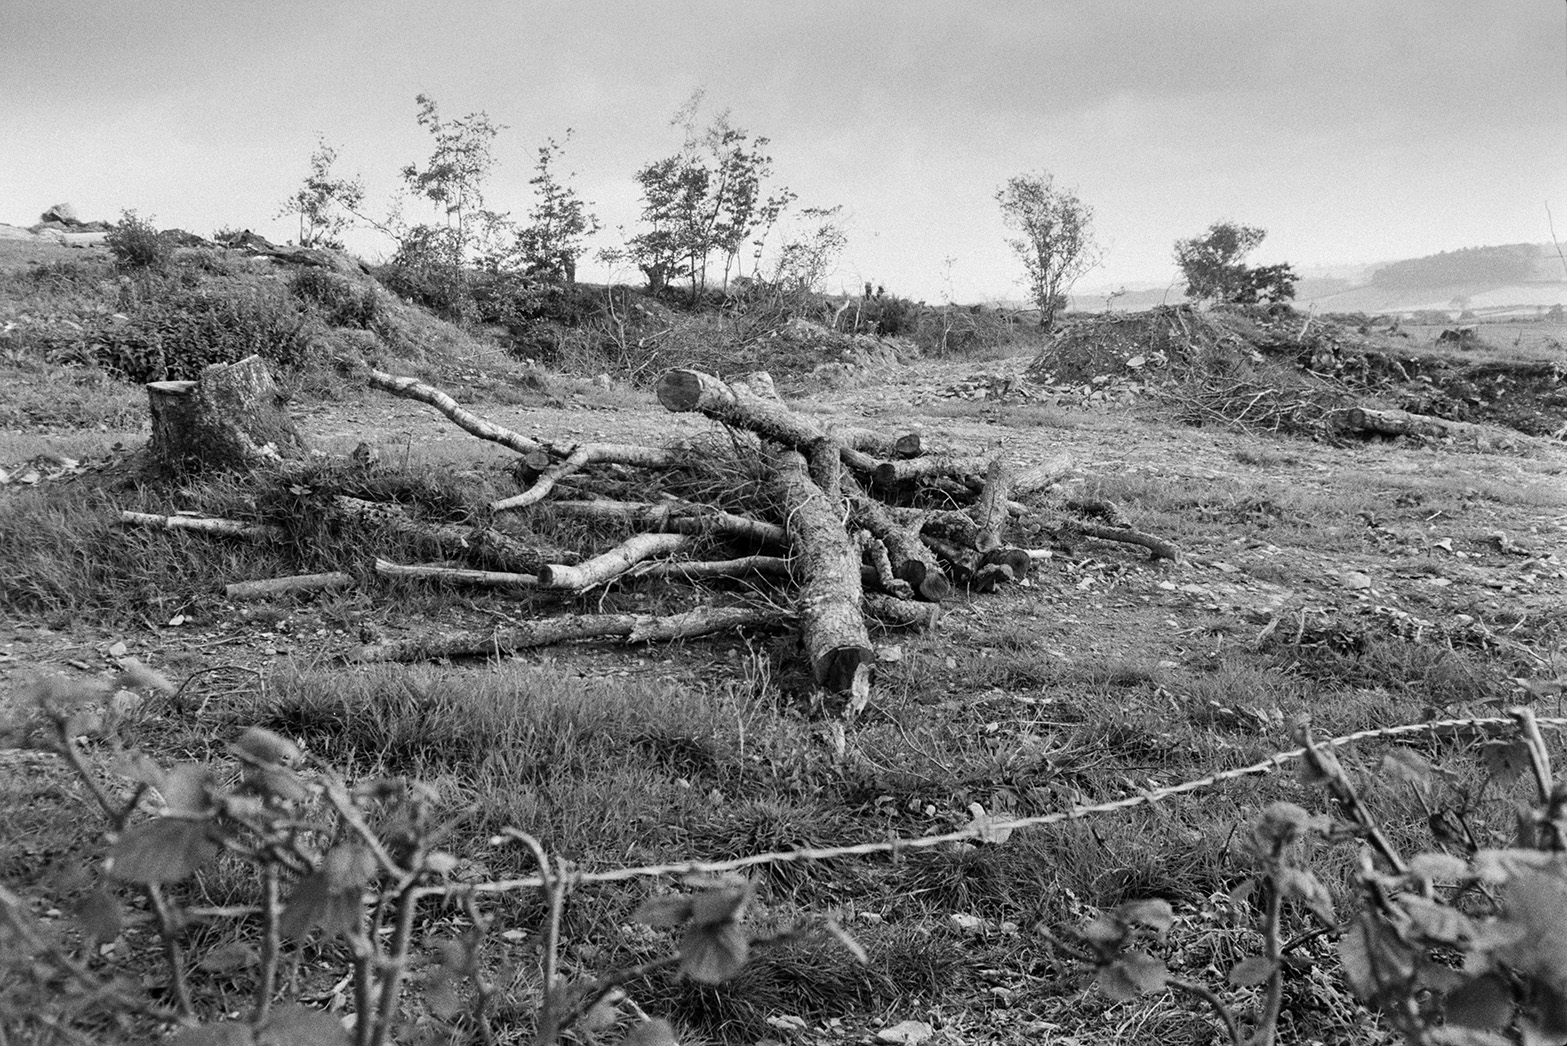 A pile of logs in a field at Mill Road Farm, Beaford with tree stumps, a hedgerow, and a barbed wire fence in the foreground. The farm was also known as Jeffrys.